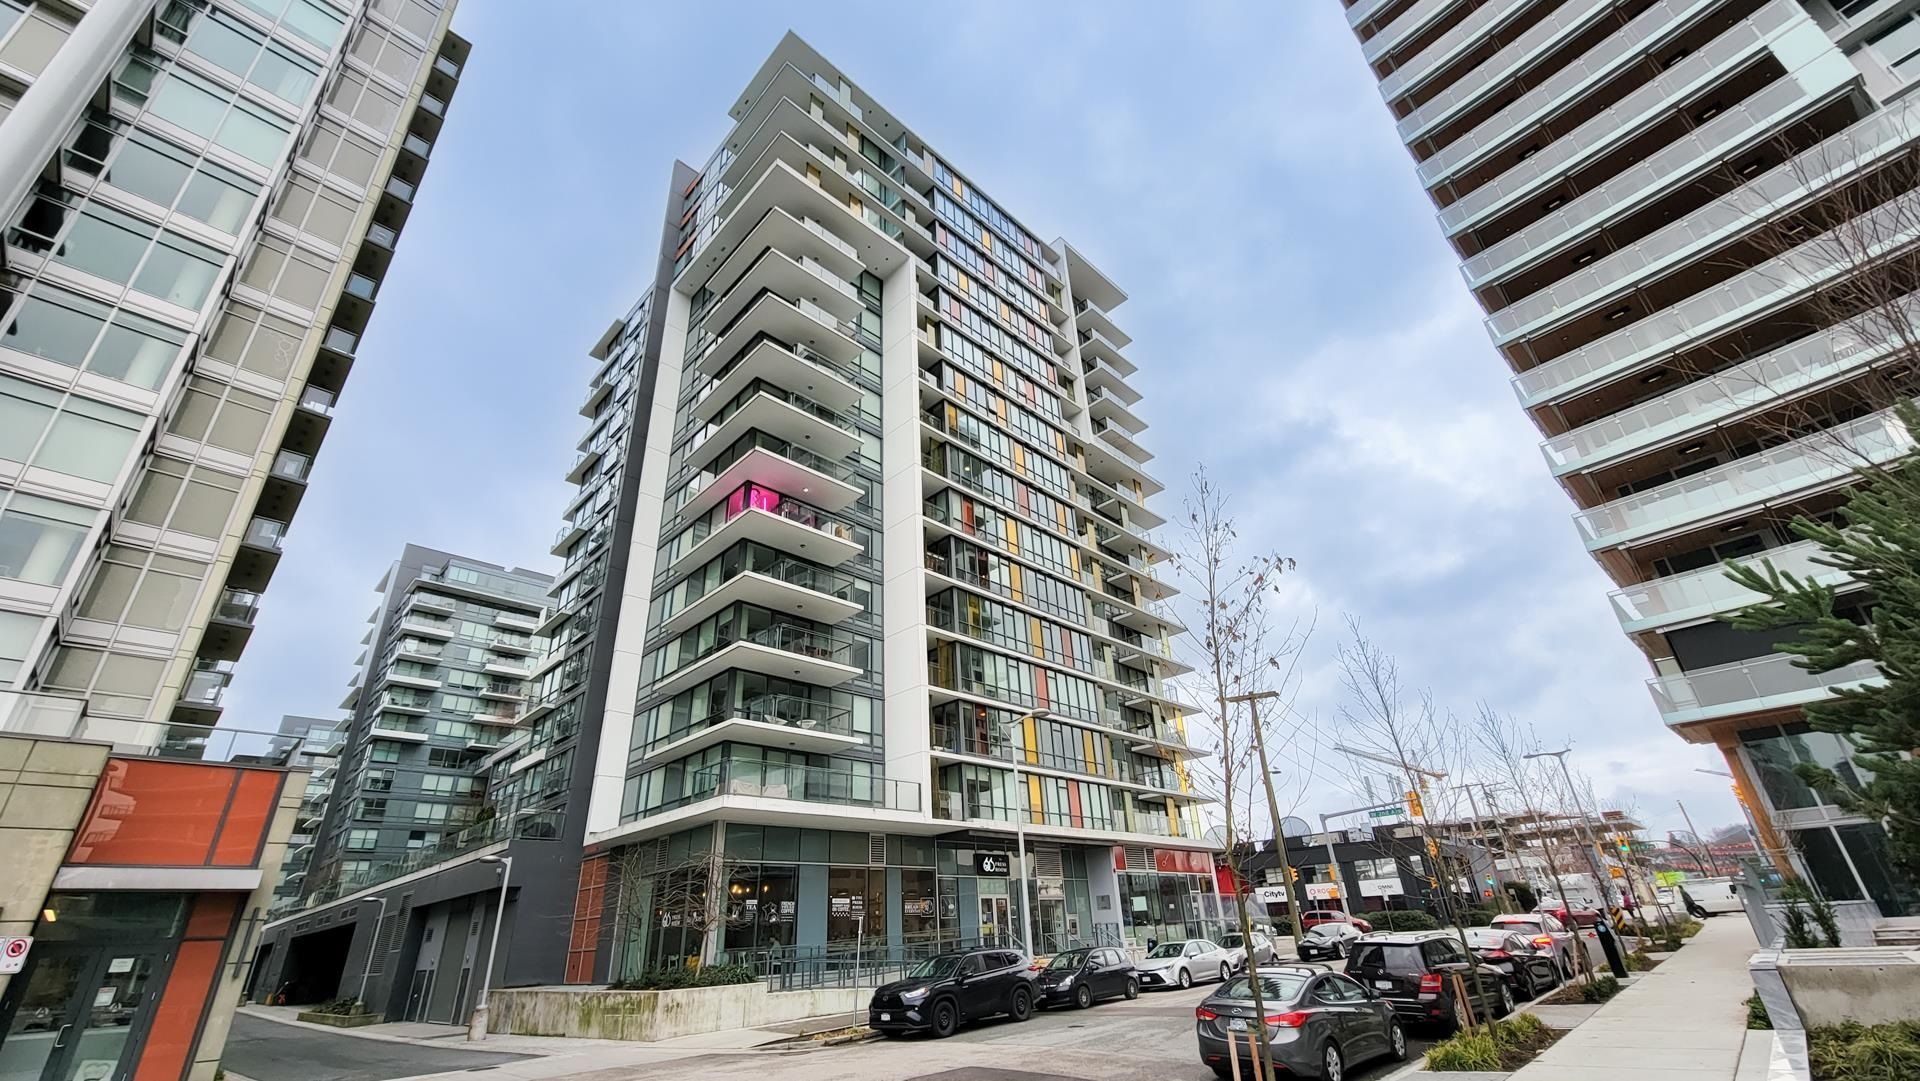 Main Photo: 306 1788 COLUMBIA STREET in Vancouver: False Creek Condo for sale (Vancouver West)  : MLS®# R2651432